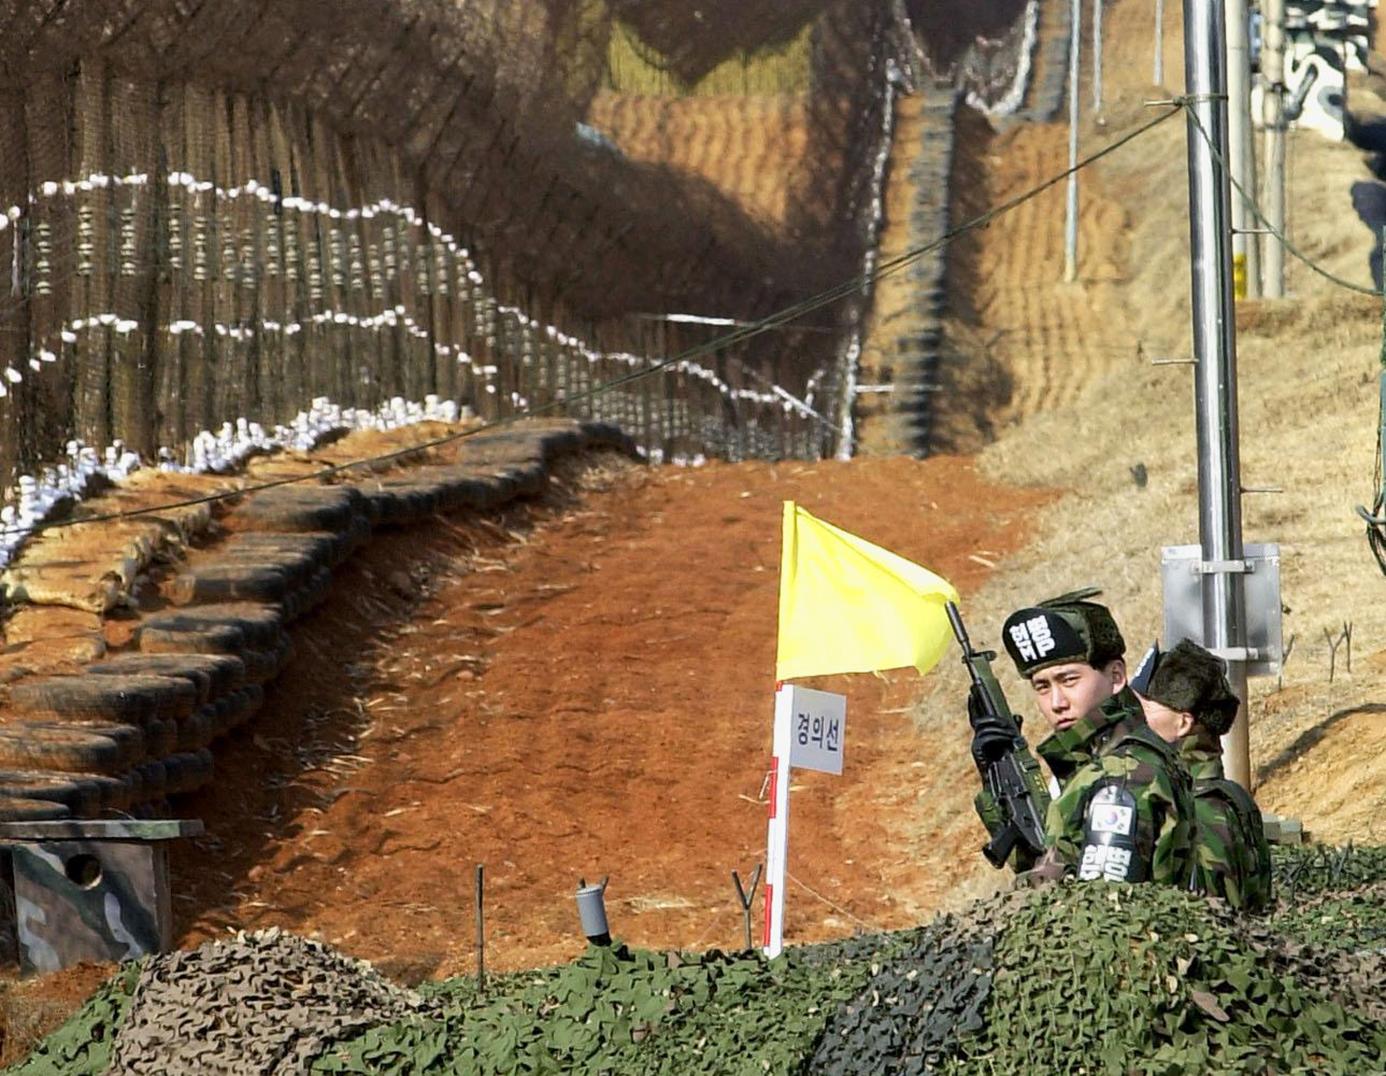 Soldiers from the South man their post along the barbed wire fence inside the DMZ that divides the two Koreas